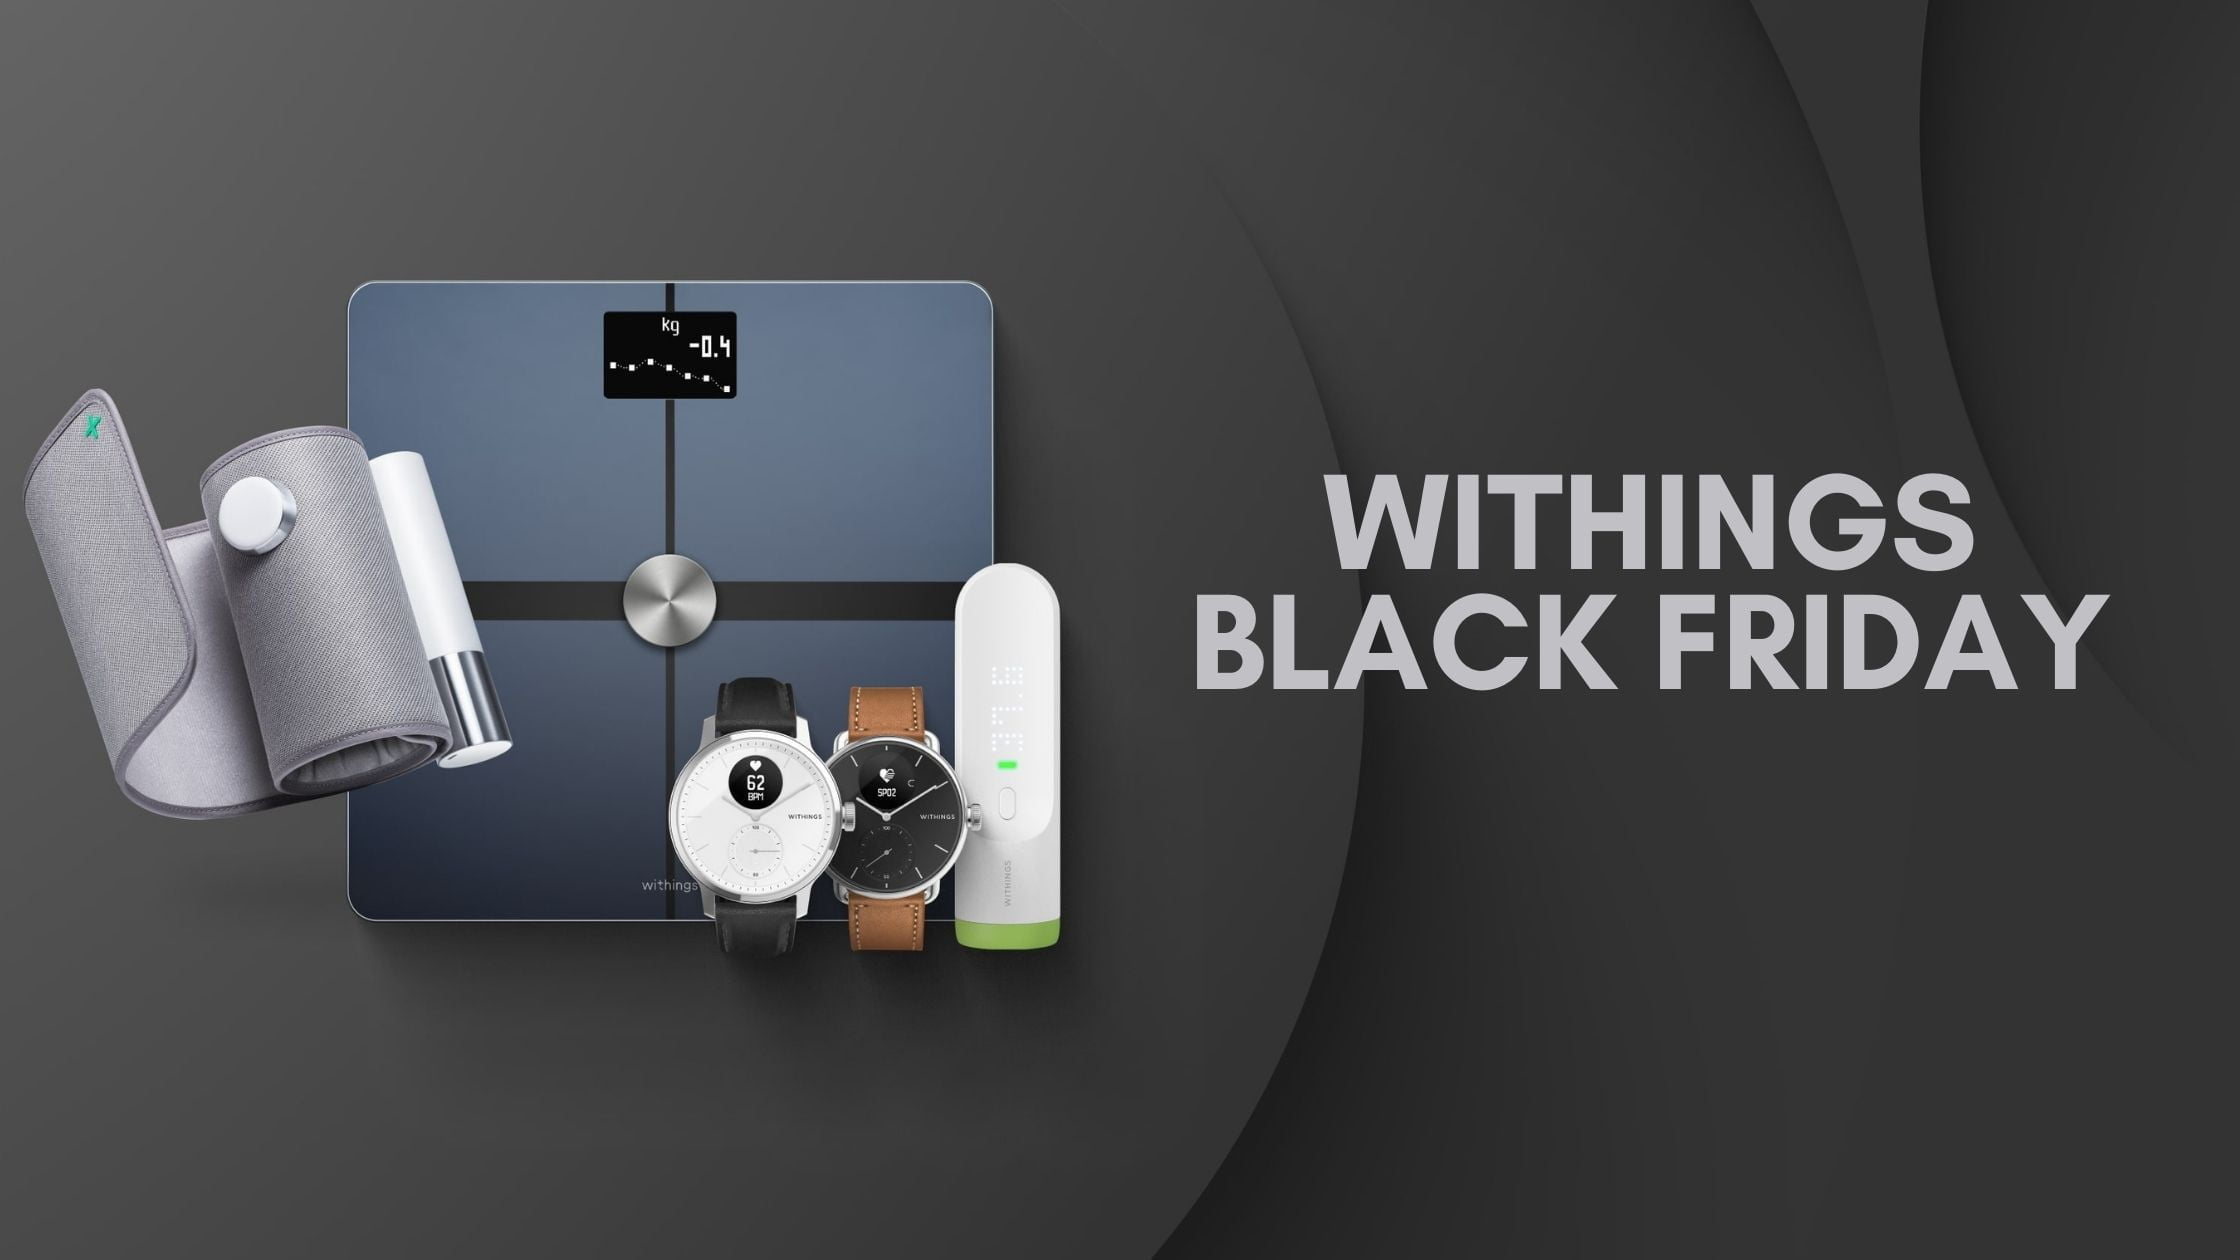 Withings Black Friday Deals on Amazon - The best smart scales go cheaper | Mighty Gadget Blog ...